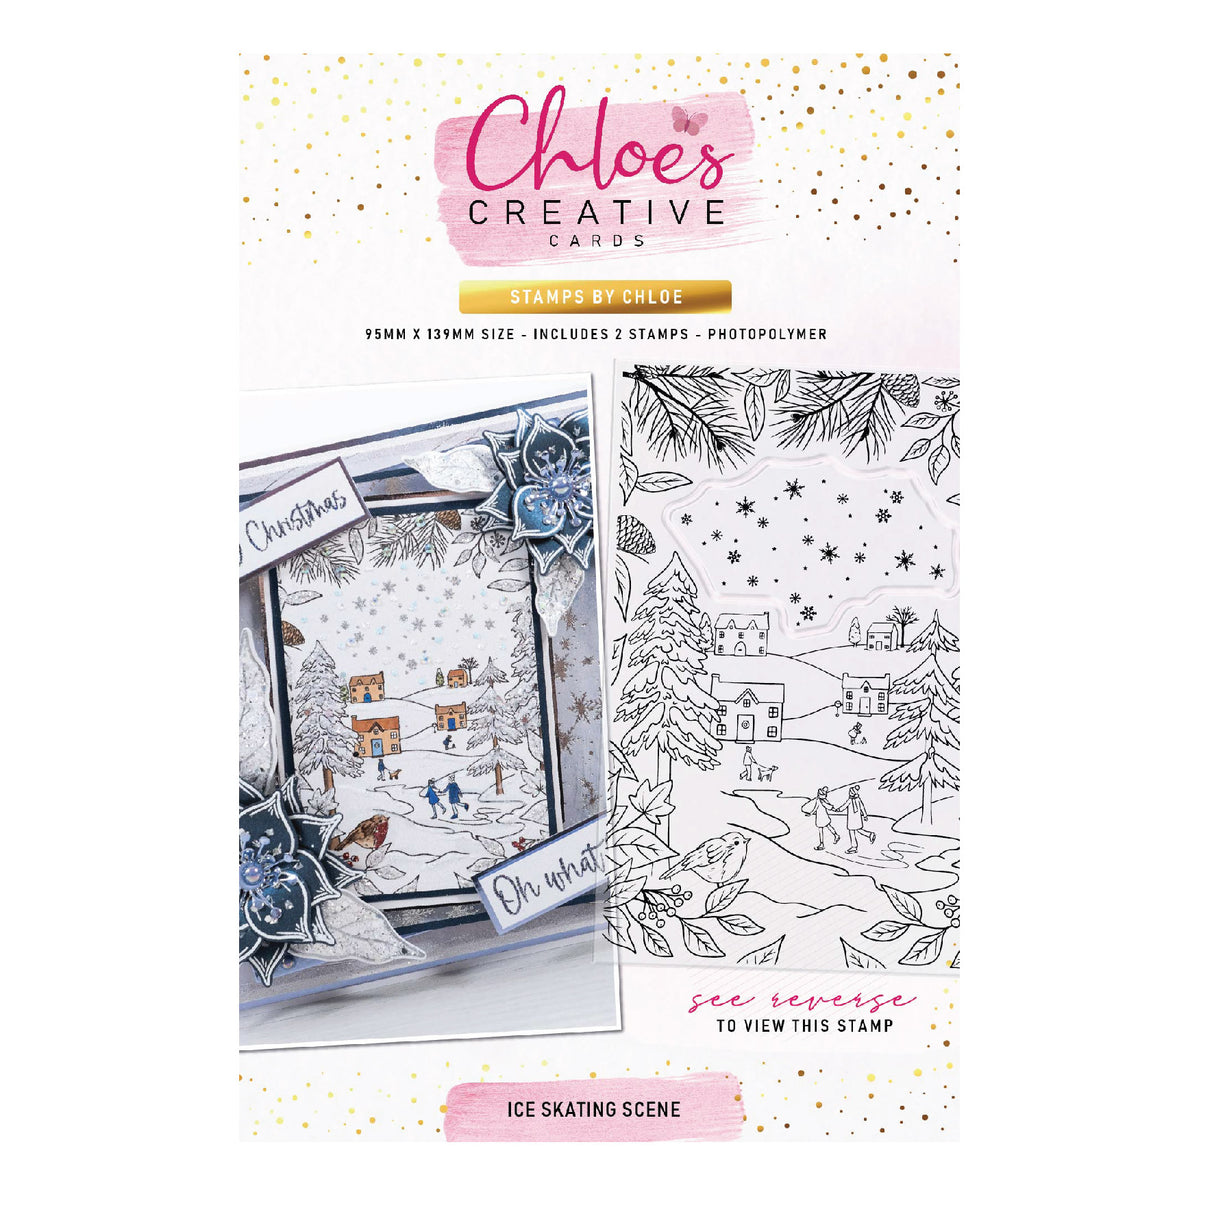 Chloes Creative Cards Photopolymer Stamp Set (A6) – Ice Skating Scene